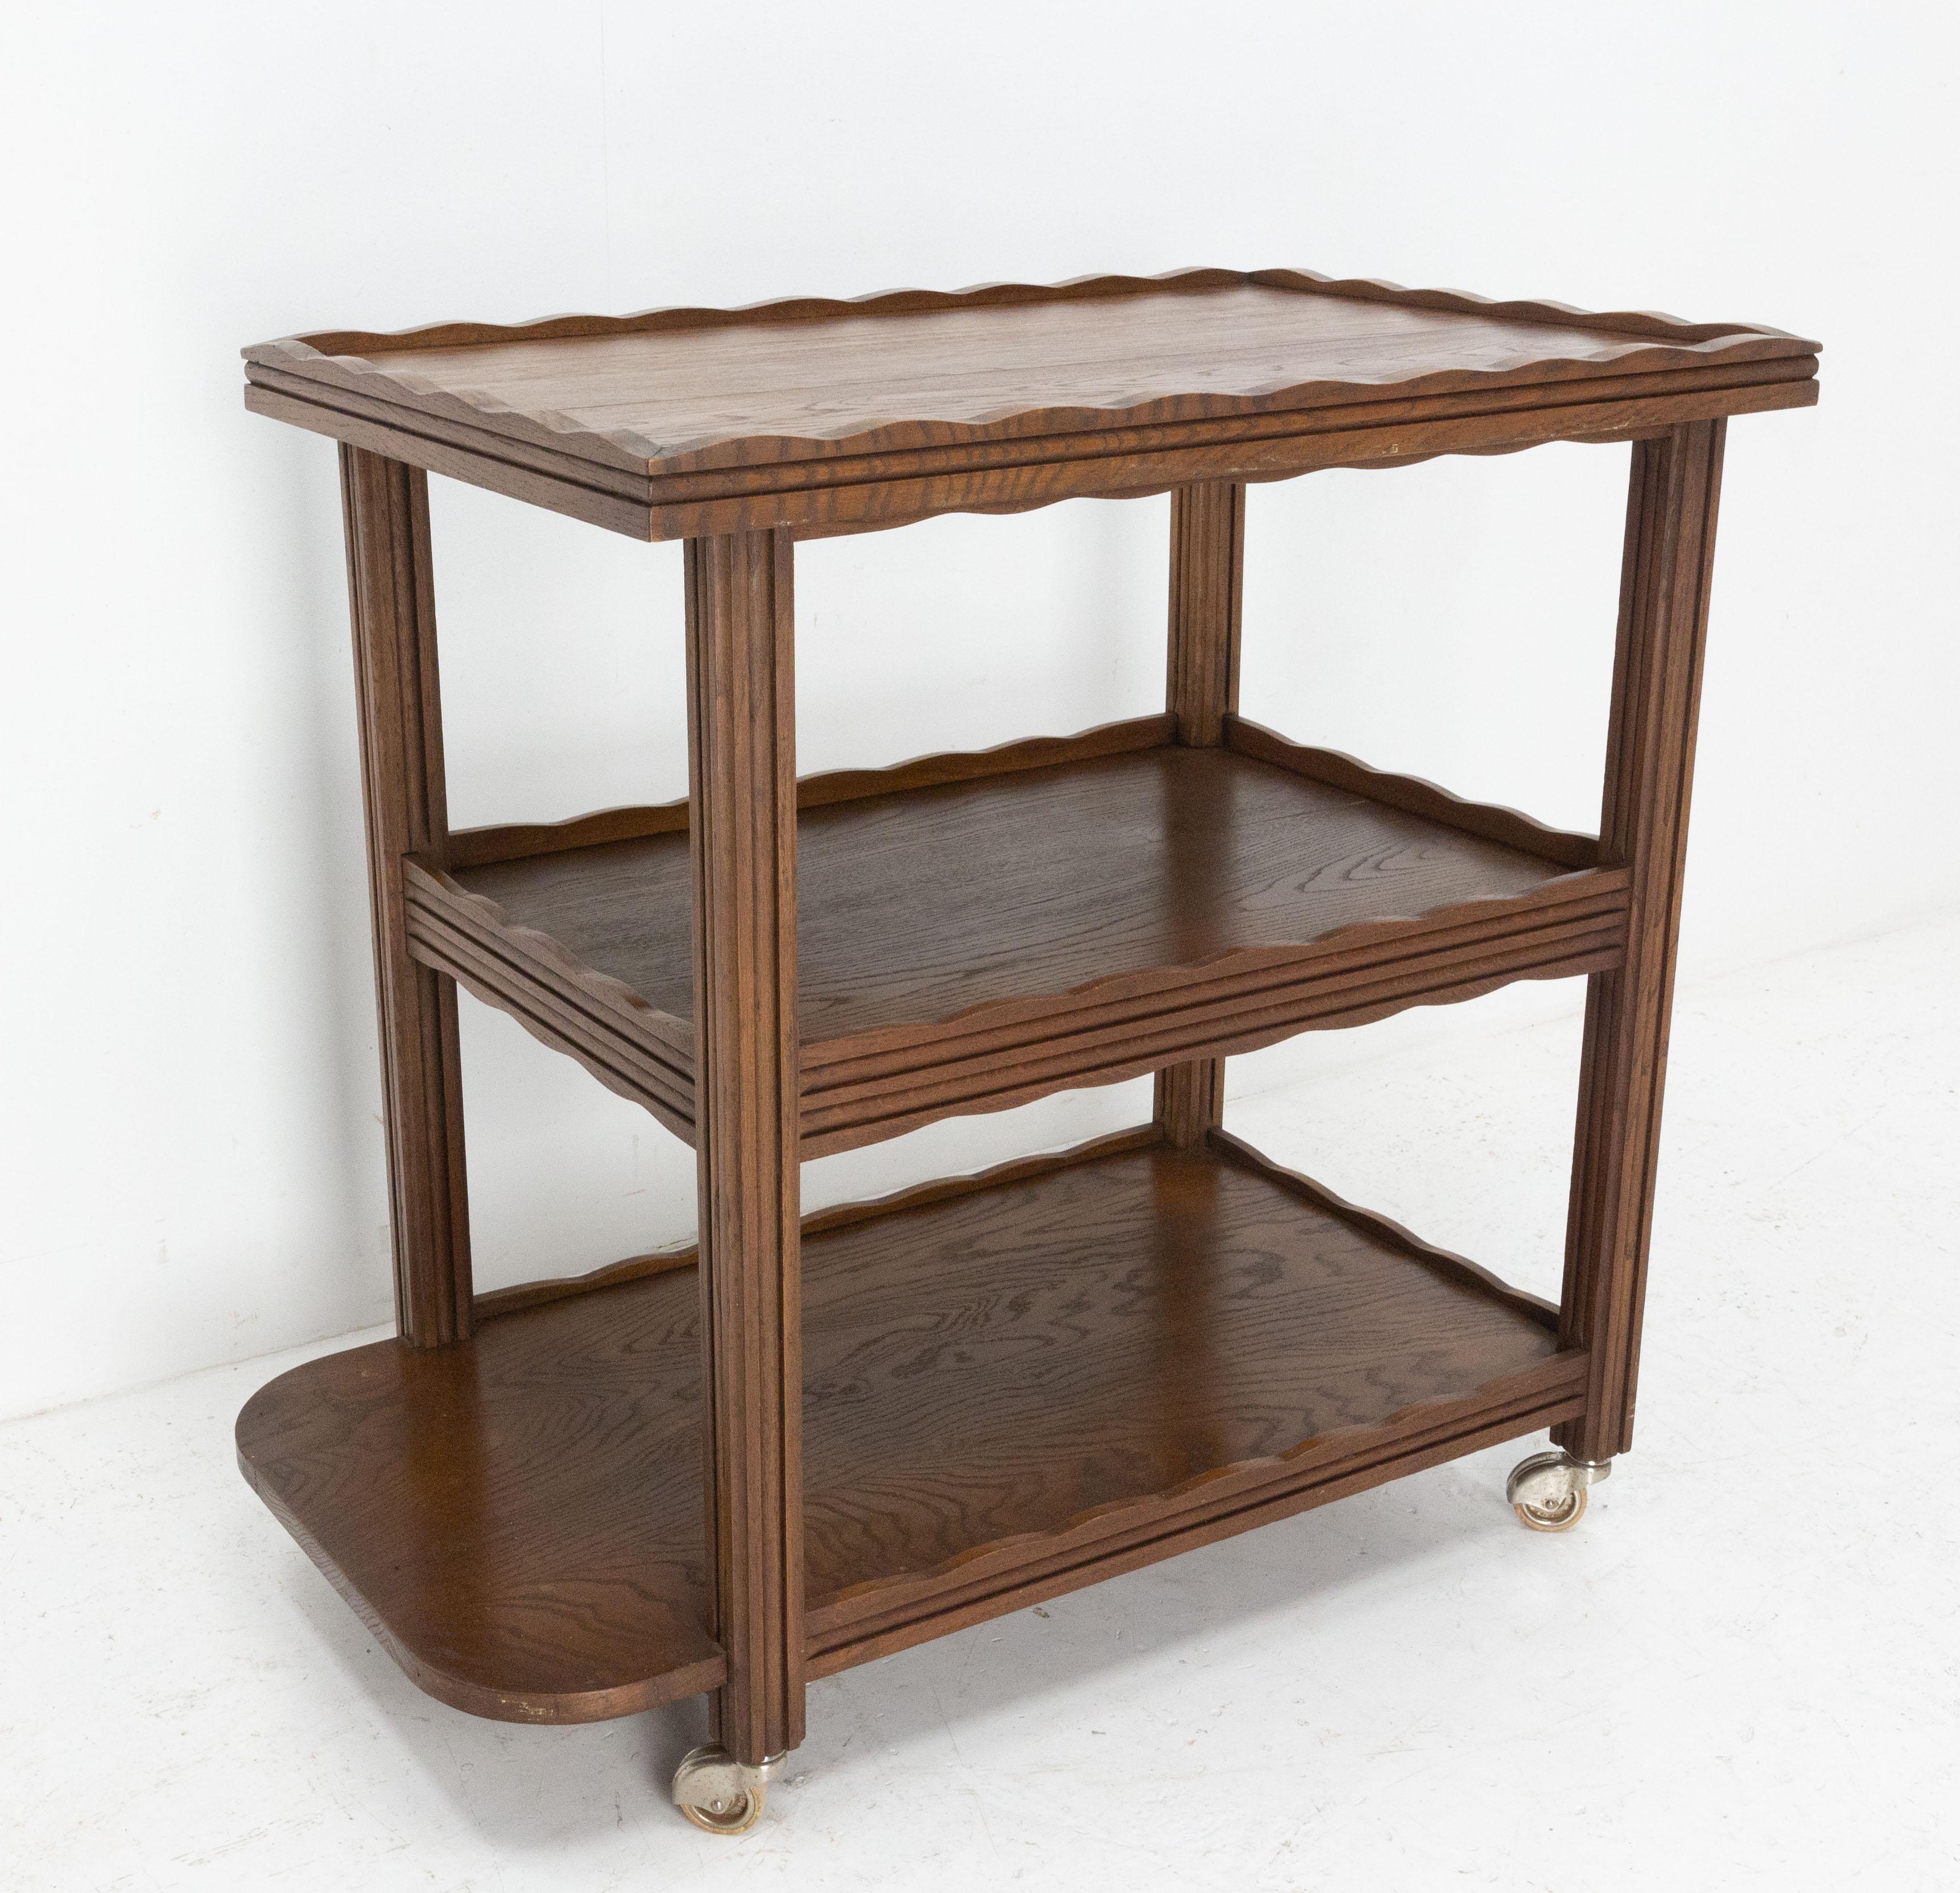 Bar cart drinks or cocktail trolley
Interior dimension of the first tray: L: 29.53 in. x 9.84 in. (75 x 45 cm)
Massive oak
On wheels
French, circa 1940
Good vintage condition.

Shipping:
L 83,5 P53 H80,5 24,3 KG.
 